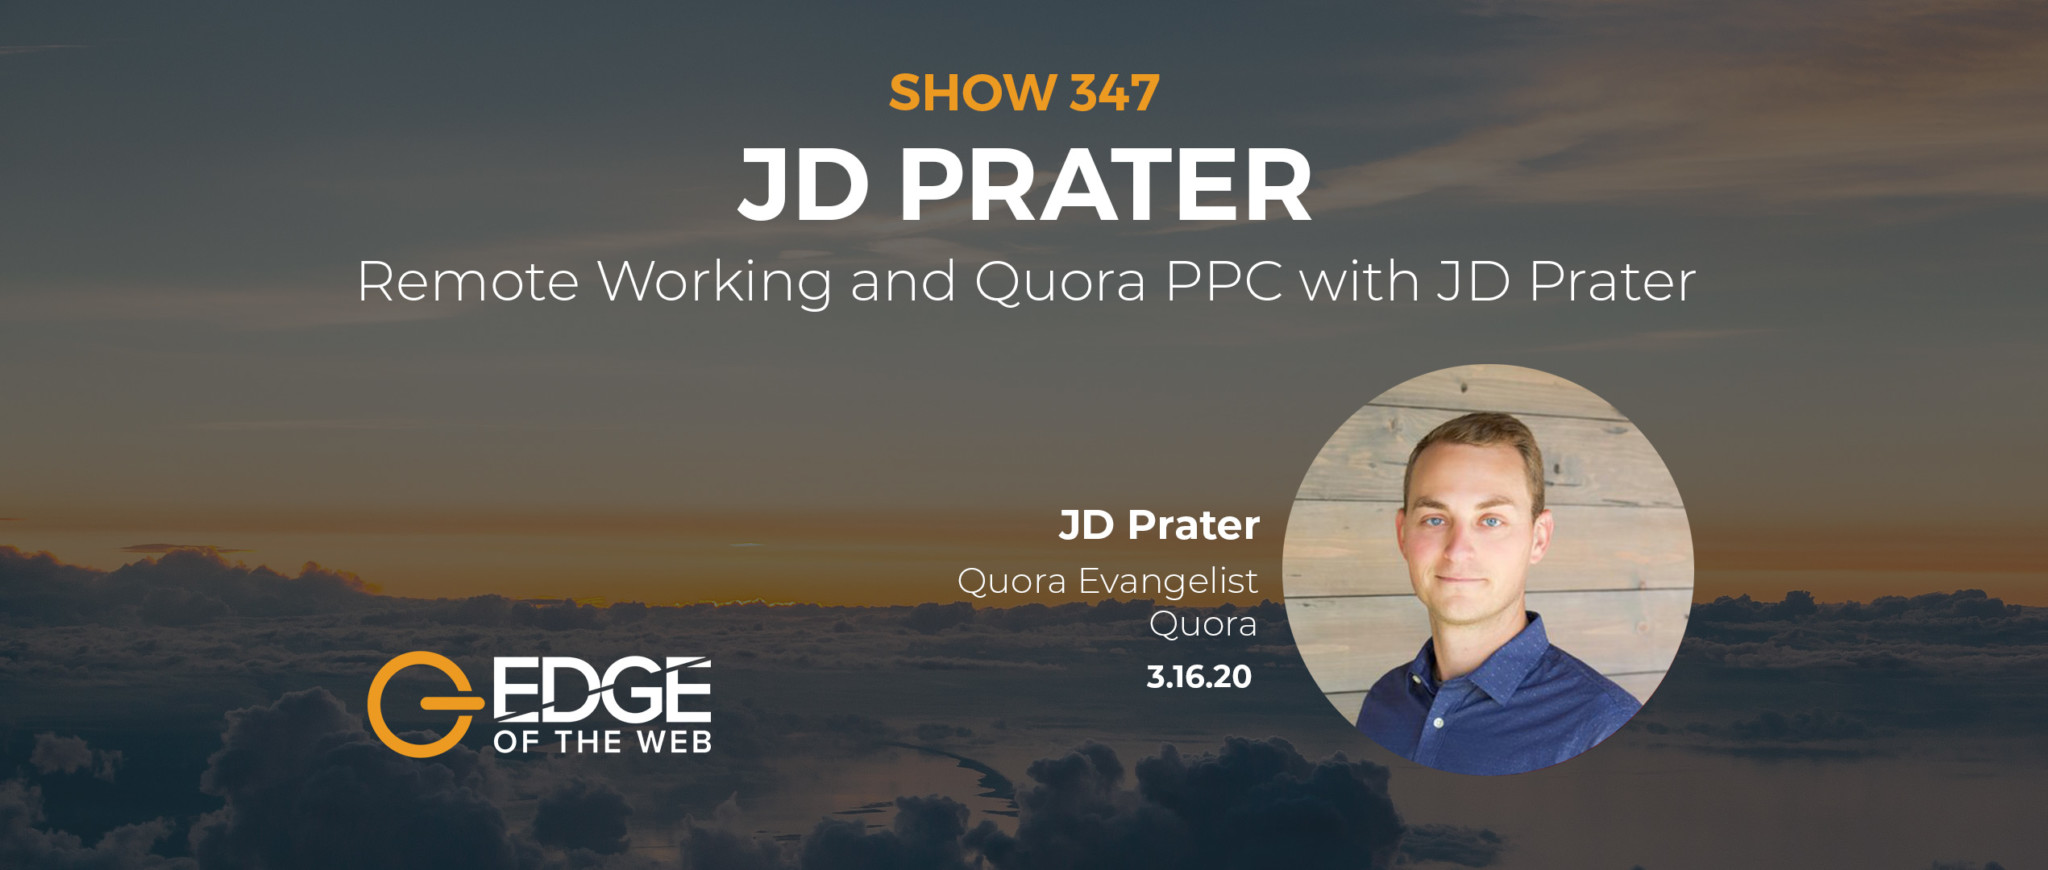 EP 347 Transcript | Remote Working and Quora PPC with JD Prater